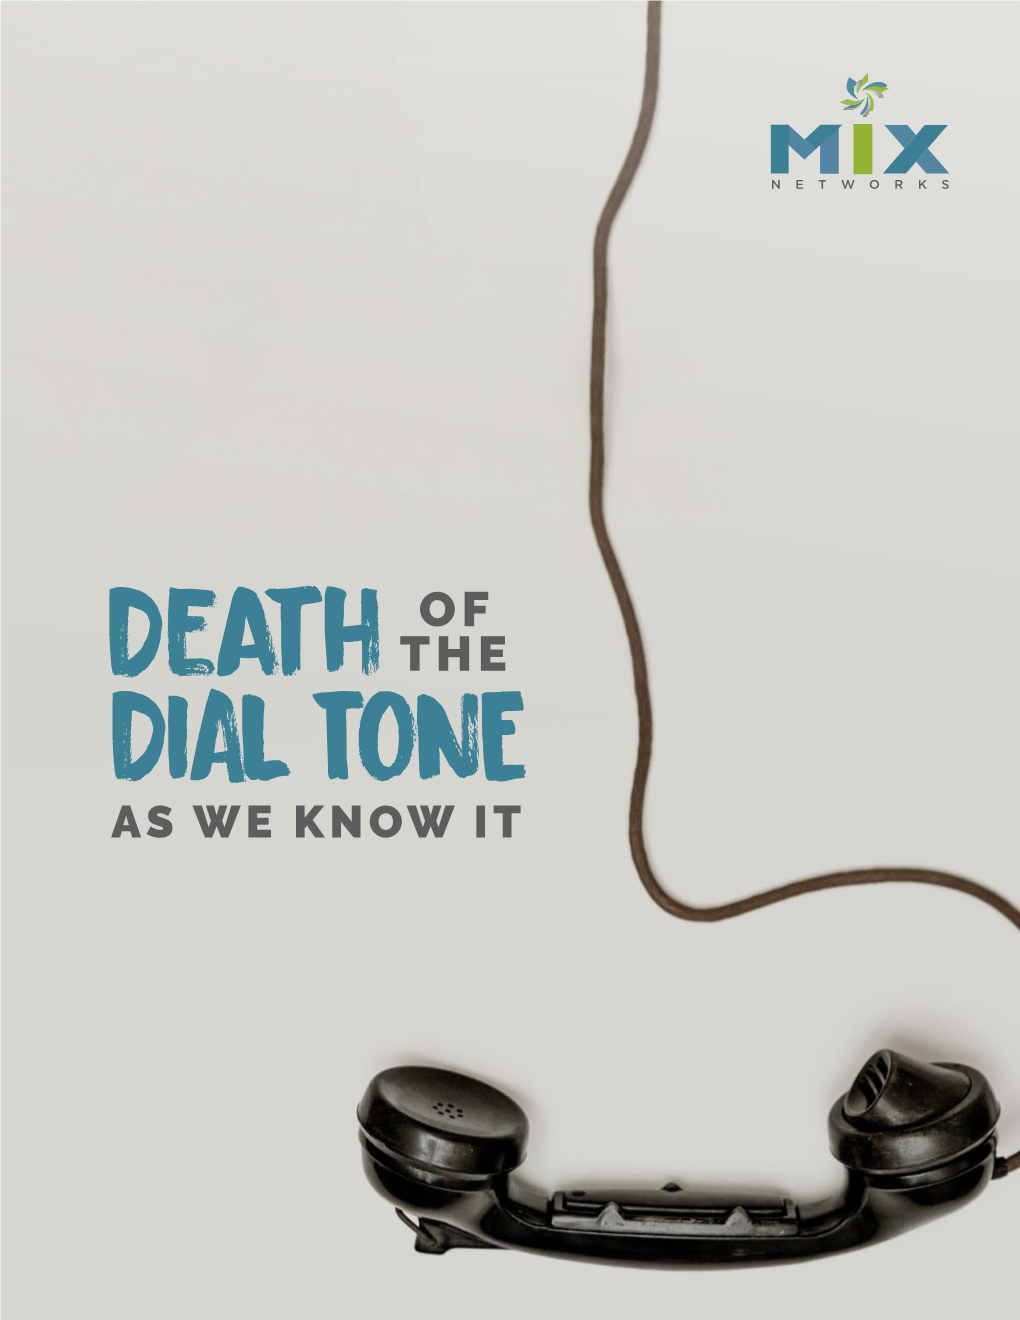 DIAL TONE AS WE KNOW IT Death of the Dial Tone As We Know It